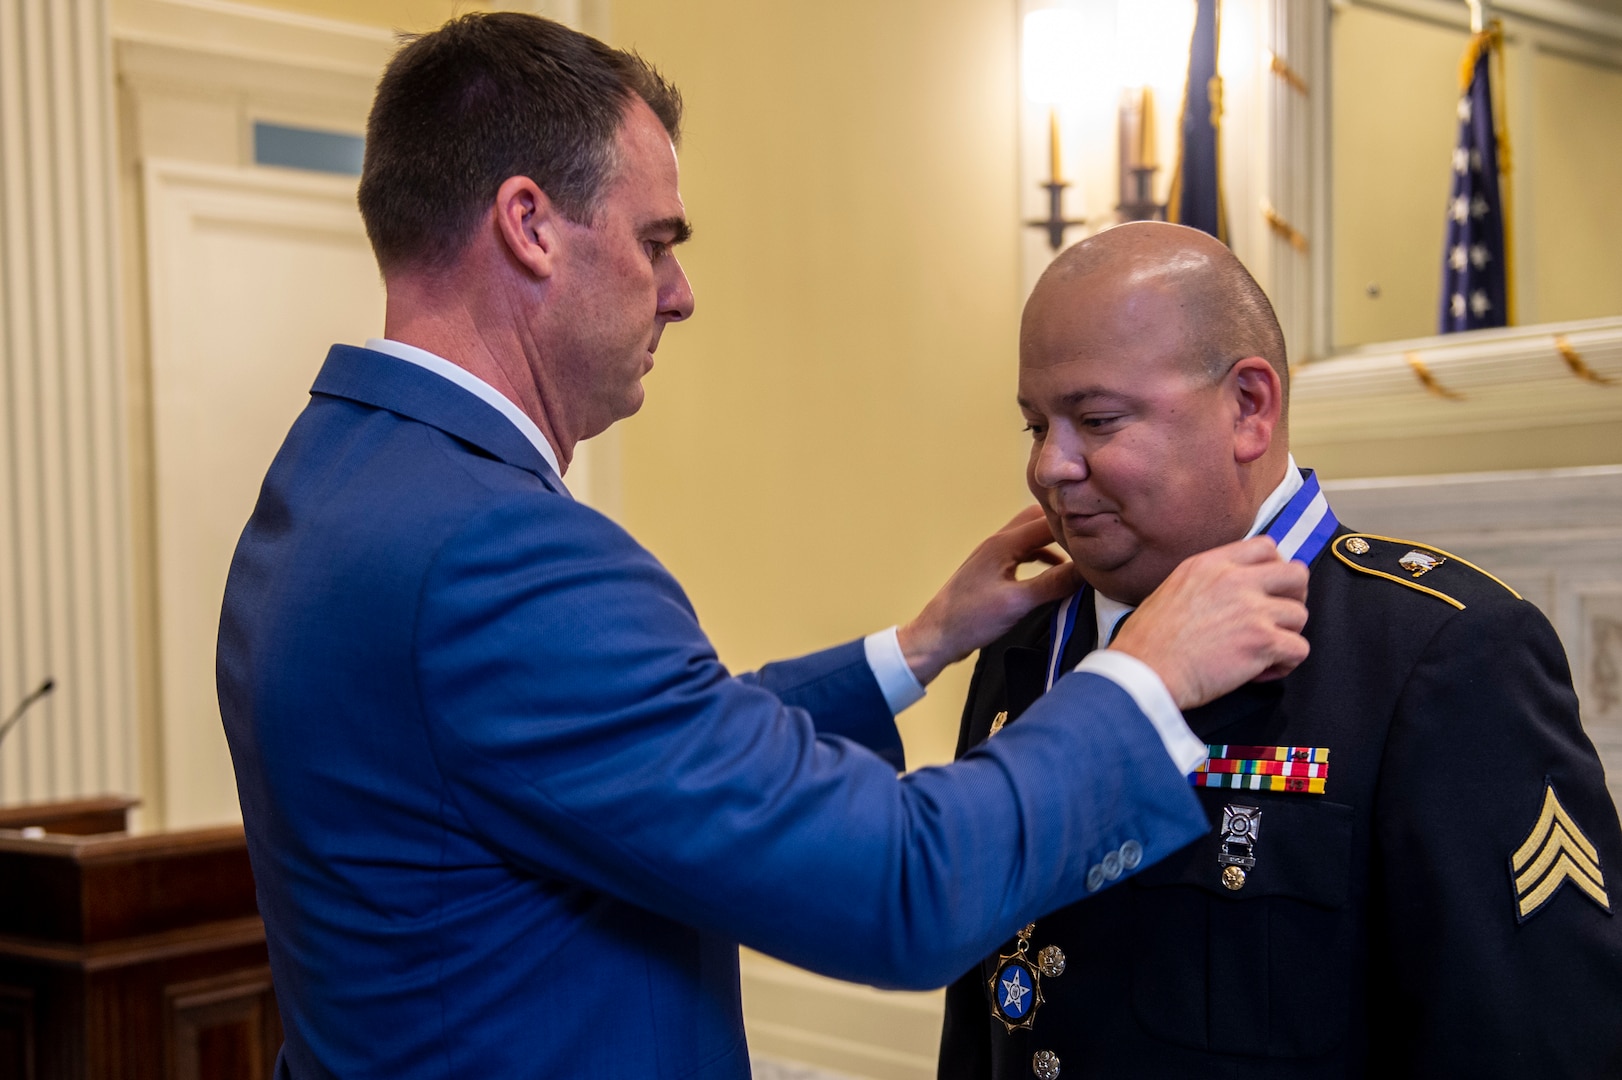 Governor Kevin Stitt presents Oklahoma Army National Guard Sgt. Pedro Gonzales III with the inaugural Oklahoma Medal of Valor during a ceremony at the Oklahoma State Capitol in Oklahoma City, May 18, 2021. The Oklahoma Medal of Valor is the state of Oklahoma’s highest award of honor presented to a member of a public safety agency or member of the public. (Oklahoma National Guard photo by Anthony Jones)